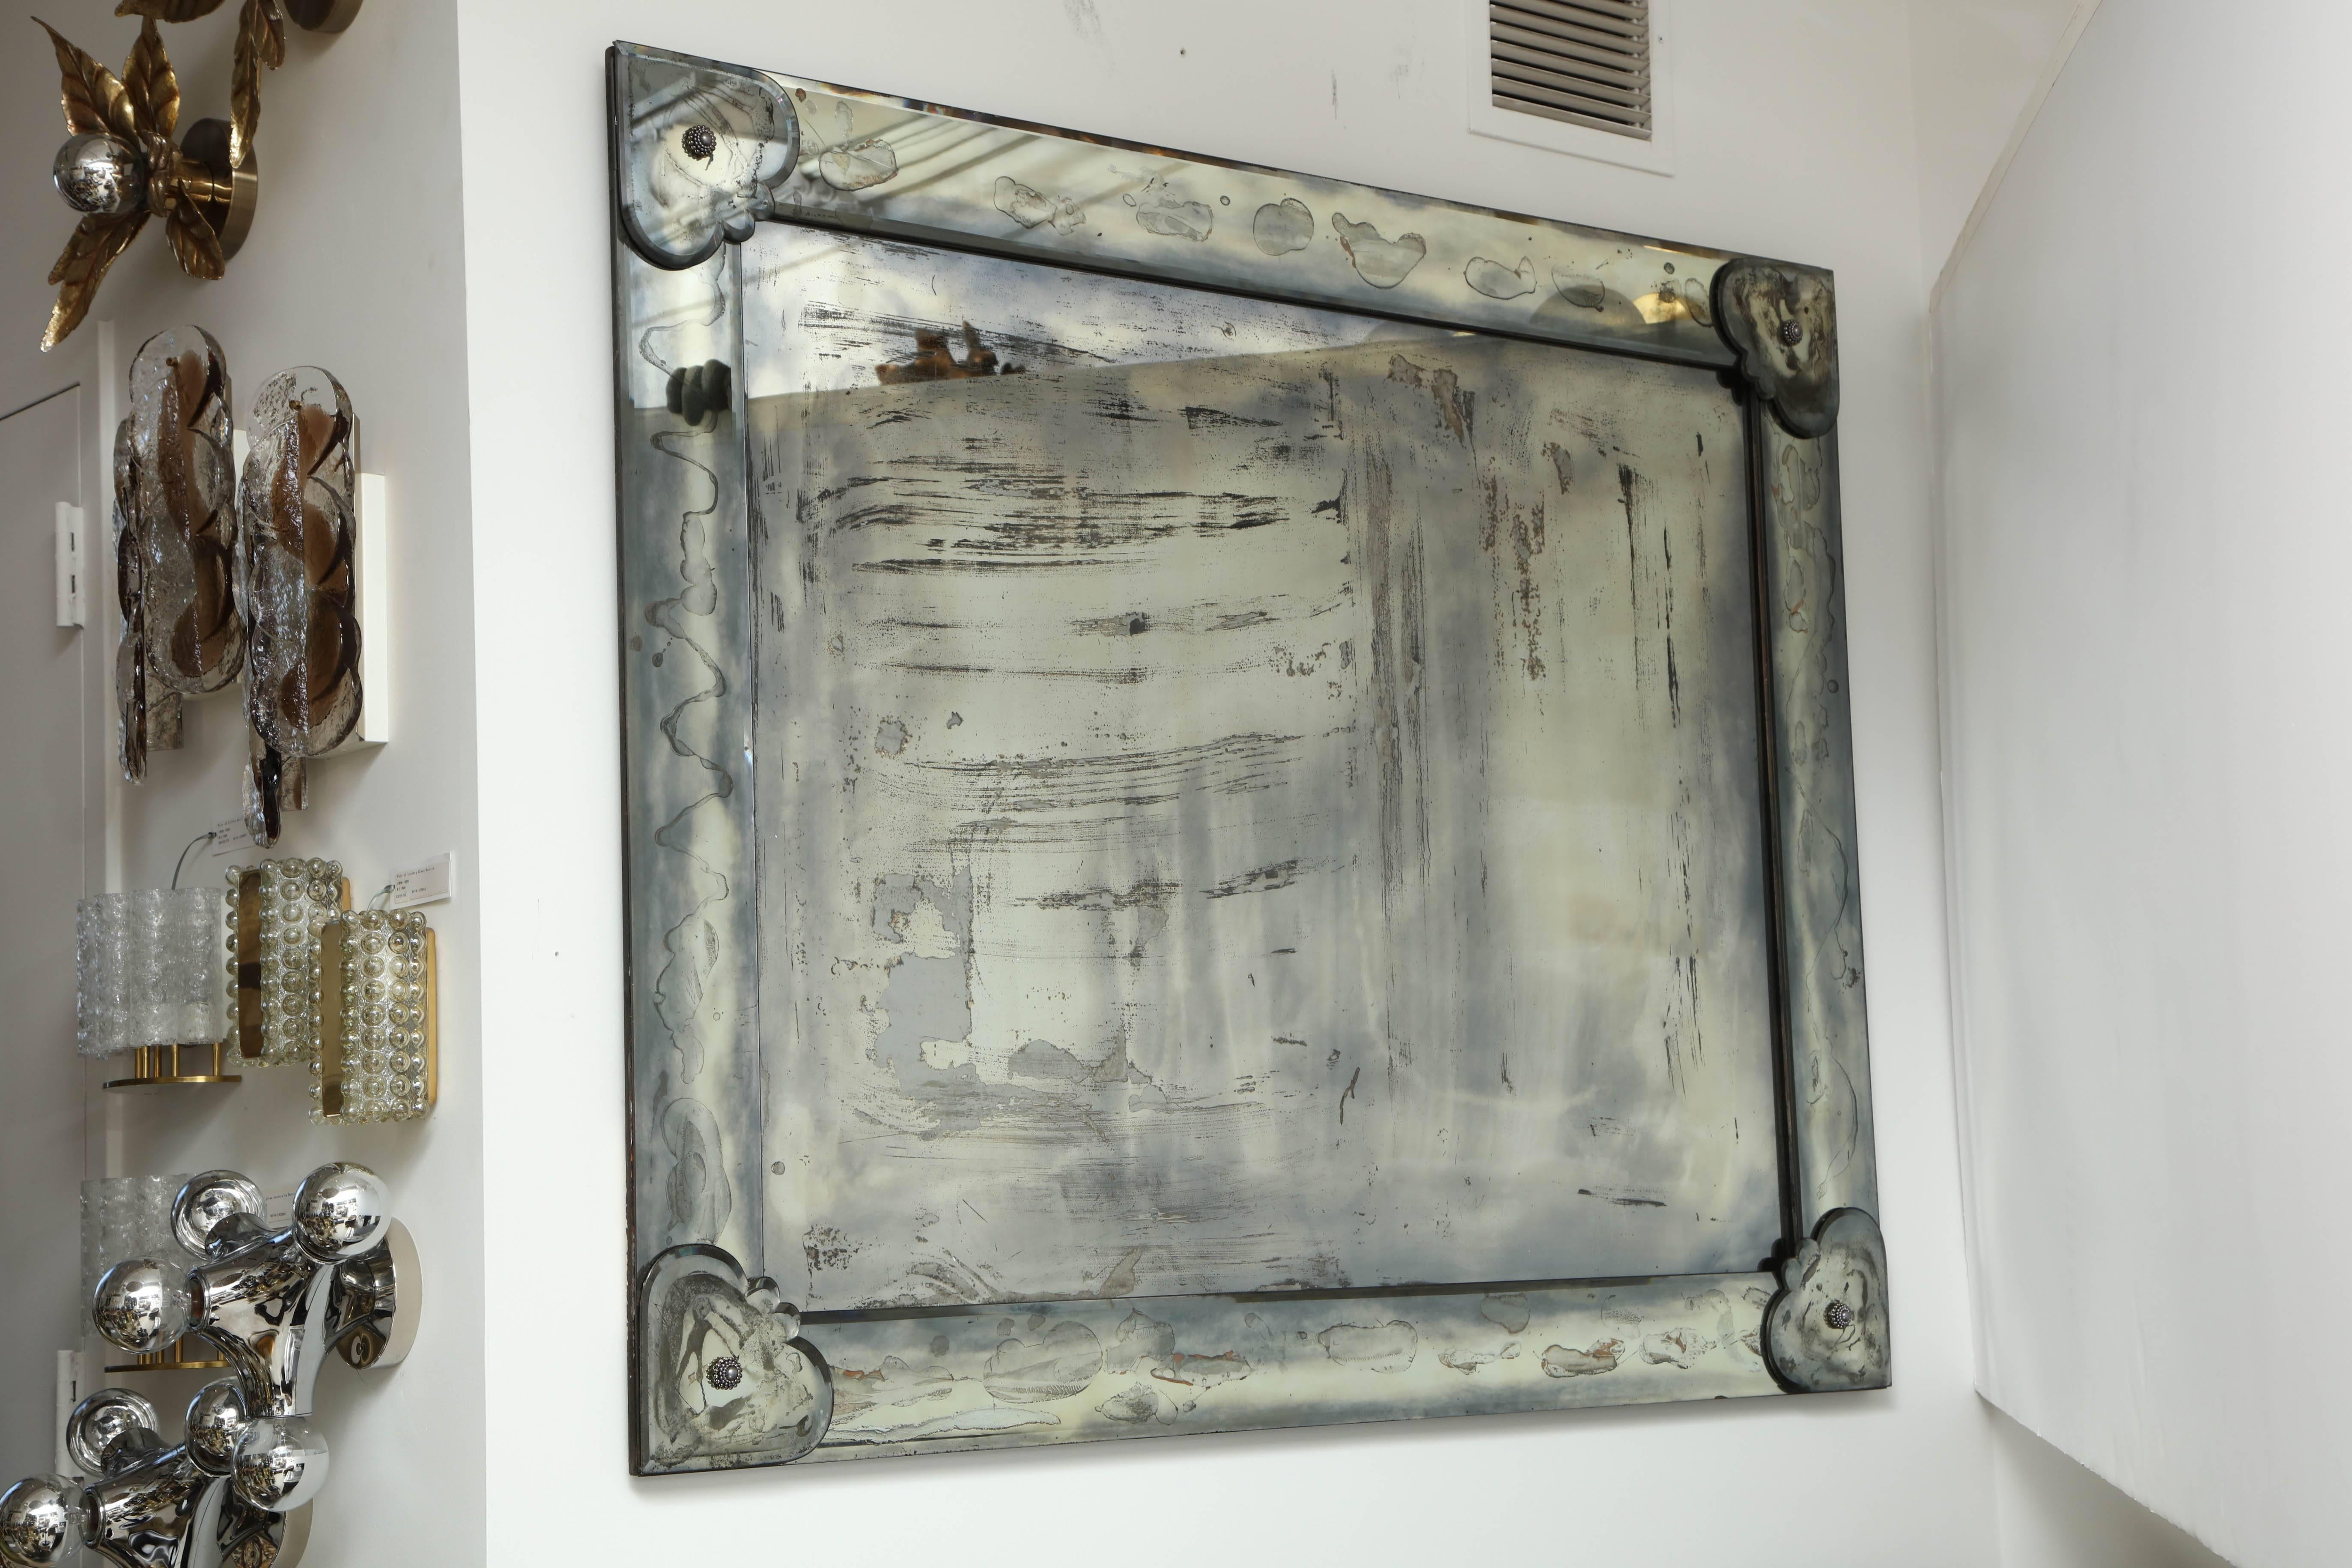 Exquisite 1950s large Venetian style mirror by James Mont.
Antiqued mirror with a cloudy and just the right amount of patination for that Glamorous smokey reflection.
The mirror has been stabilized with an enclosed back and has hardware attached